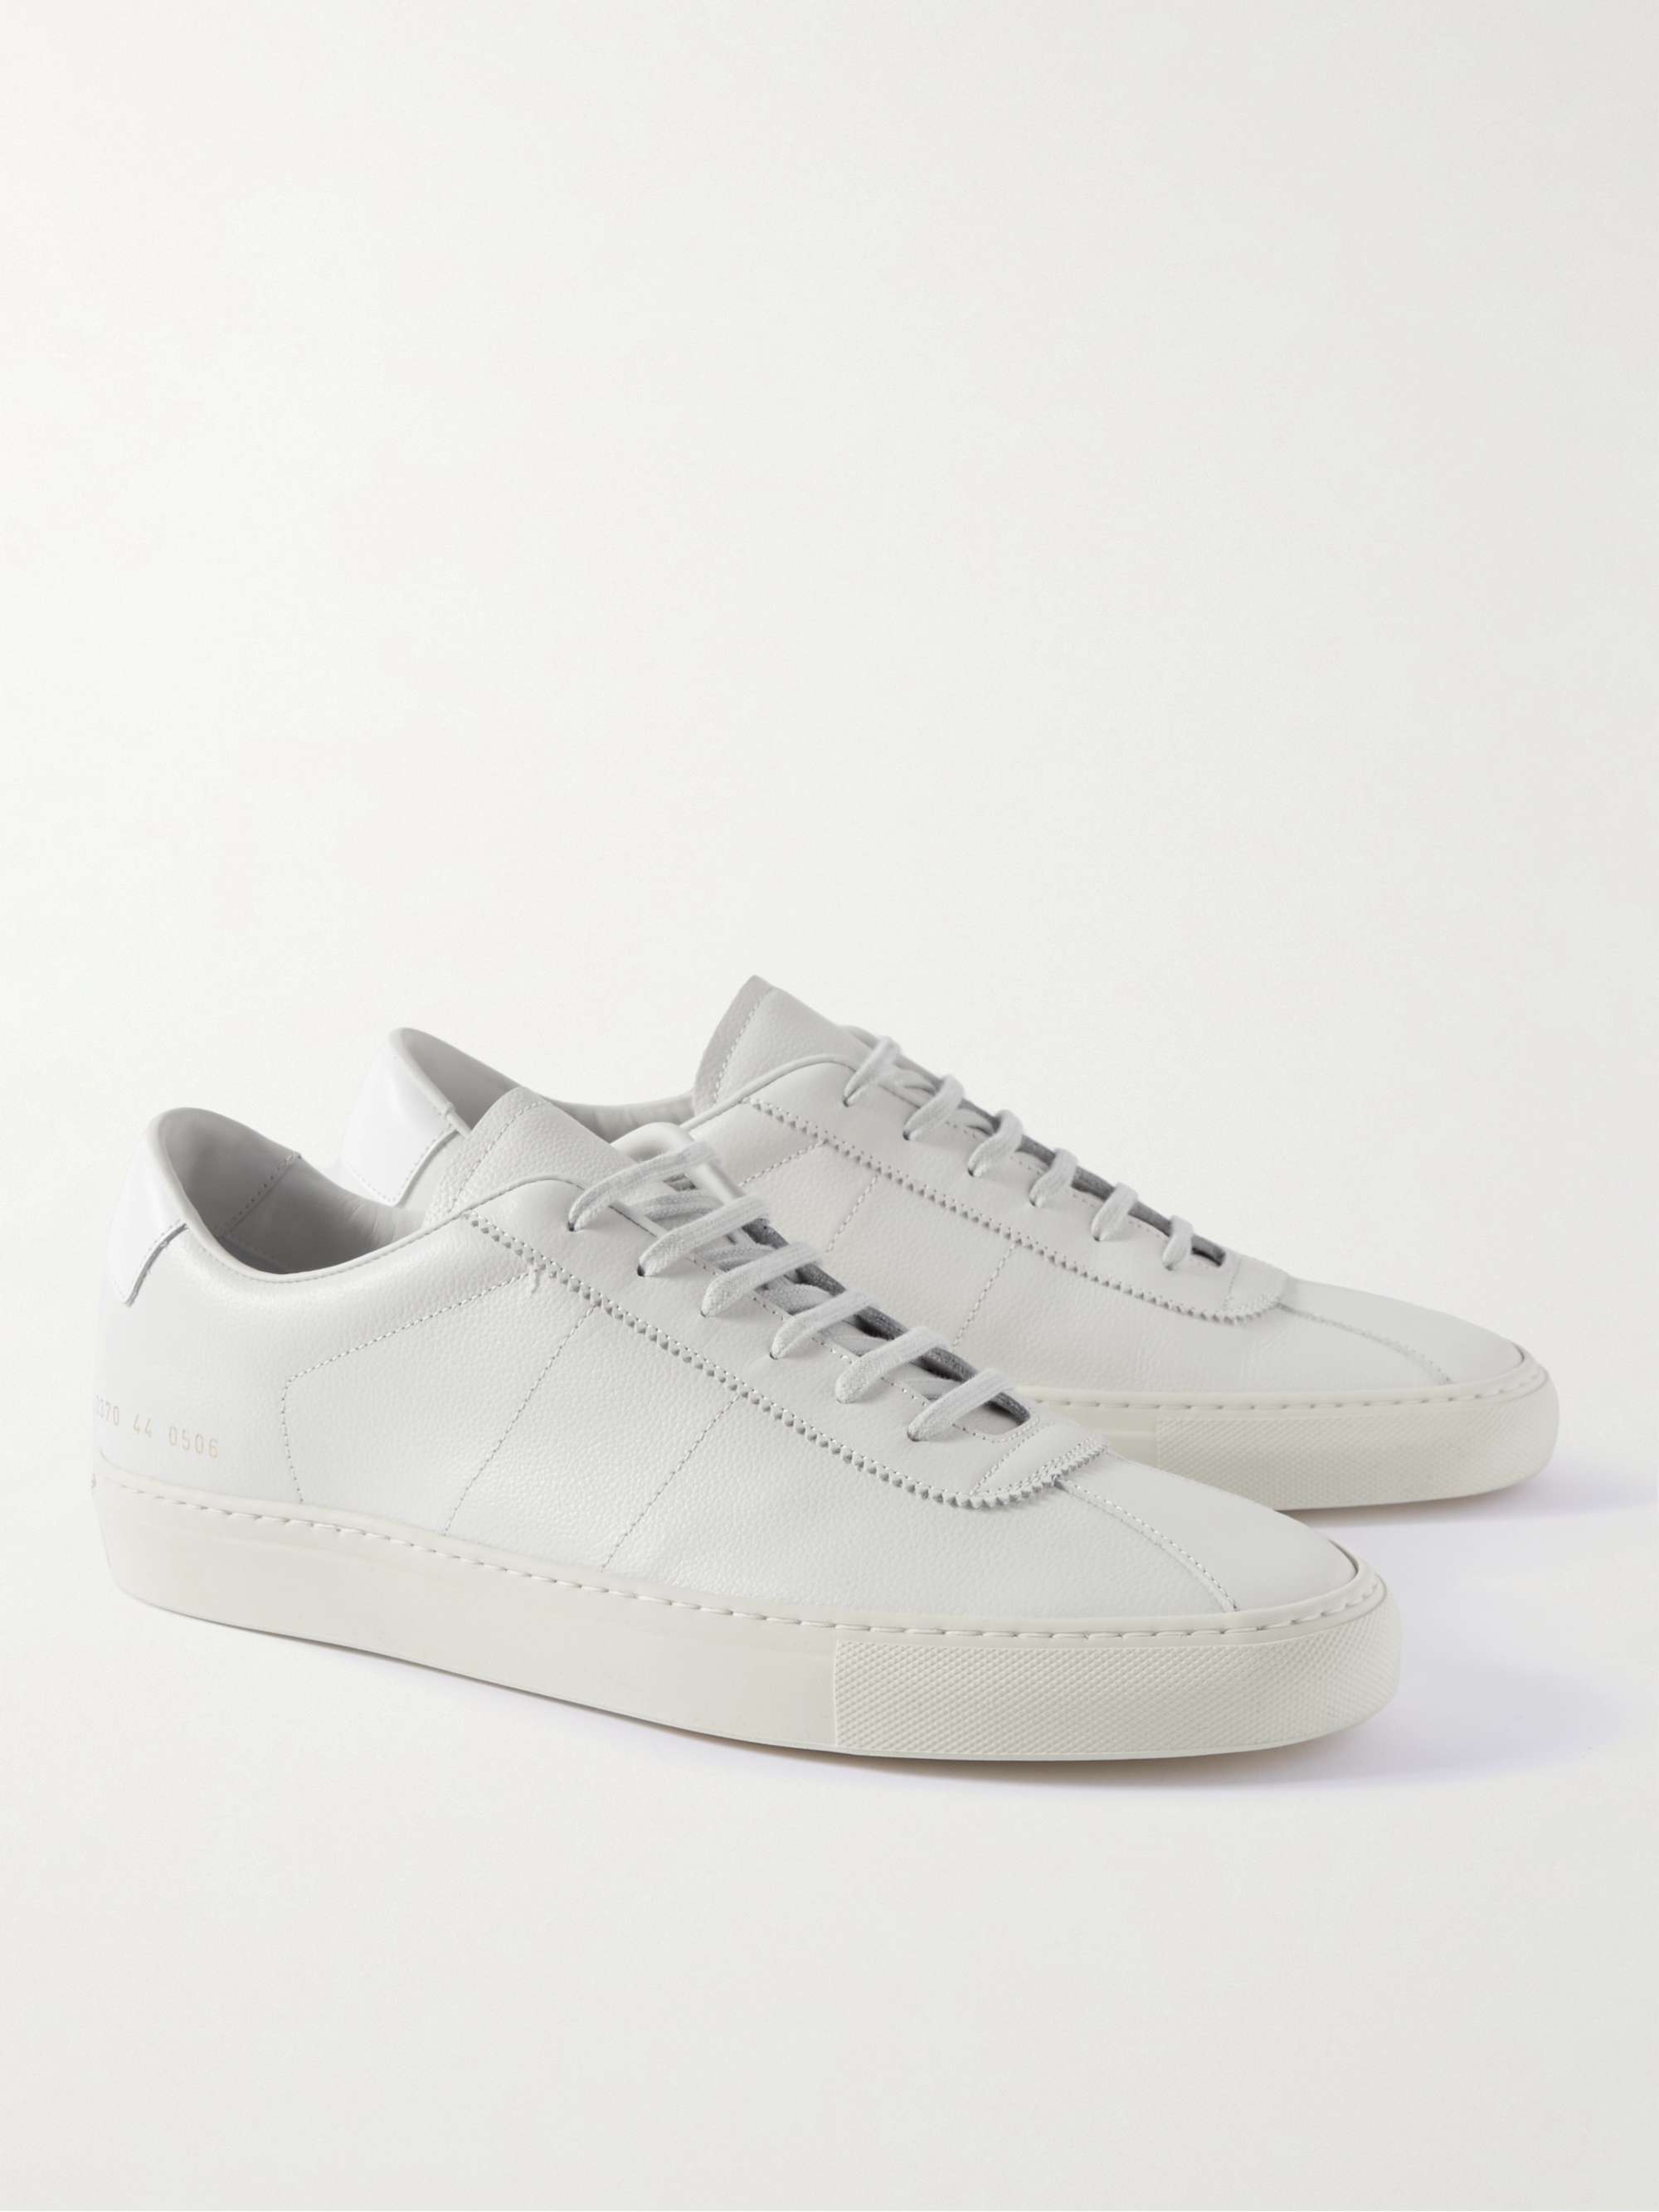 COMMON PROJECTS Tennis 77 Leather Sneakers for Men | MR PORTER